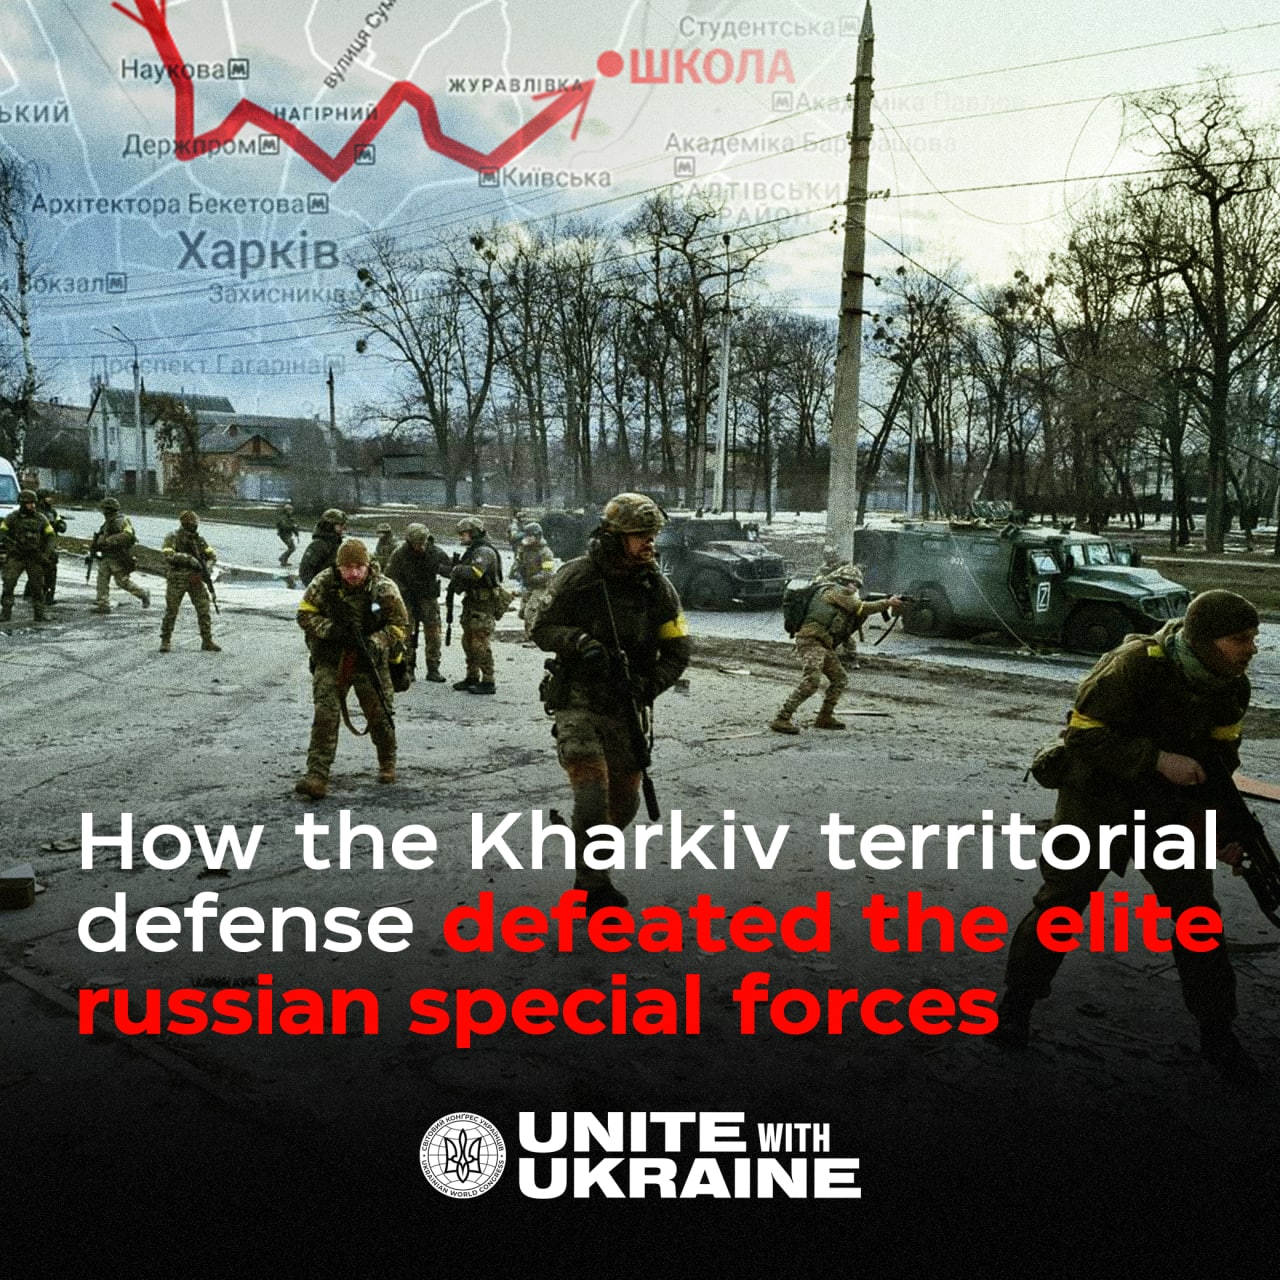 "Sitting and watching your city being torn apart is not an option"  How the Kharkiv territorial defense defeated the elite russian special forces